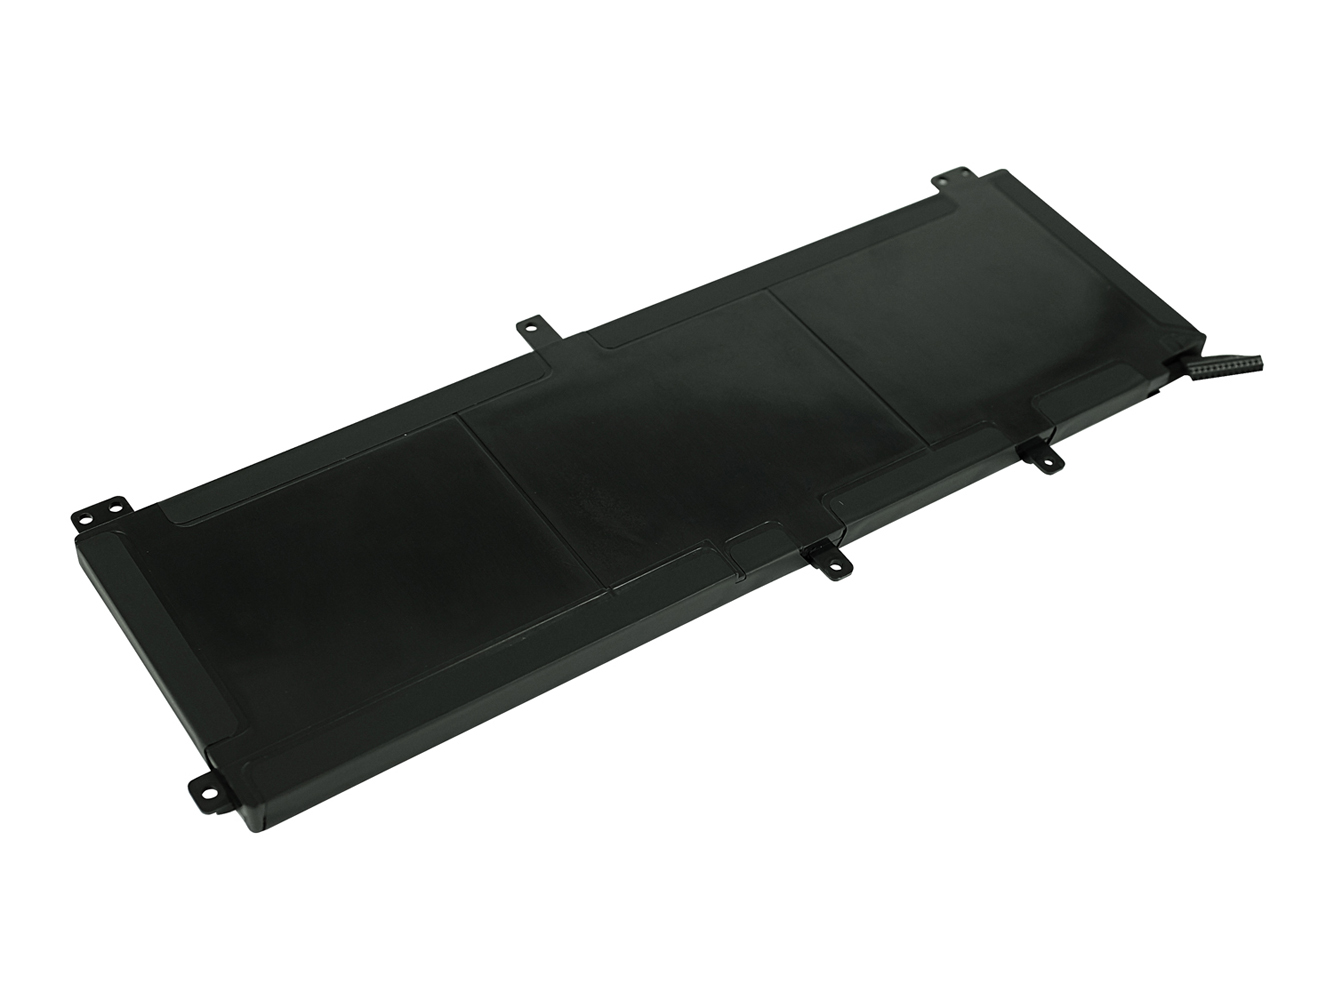 07D1WJ, 0H76MY replacement Laptop Battery for Dell XPS 15 9530 Series, 11.10V